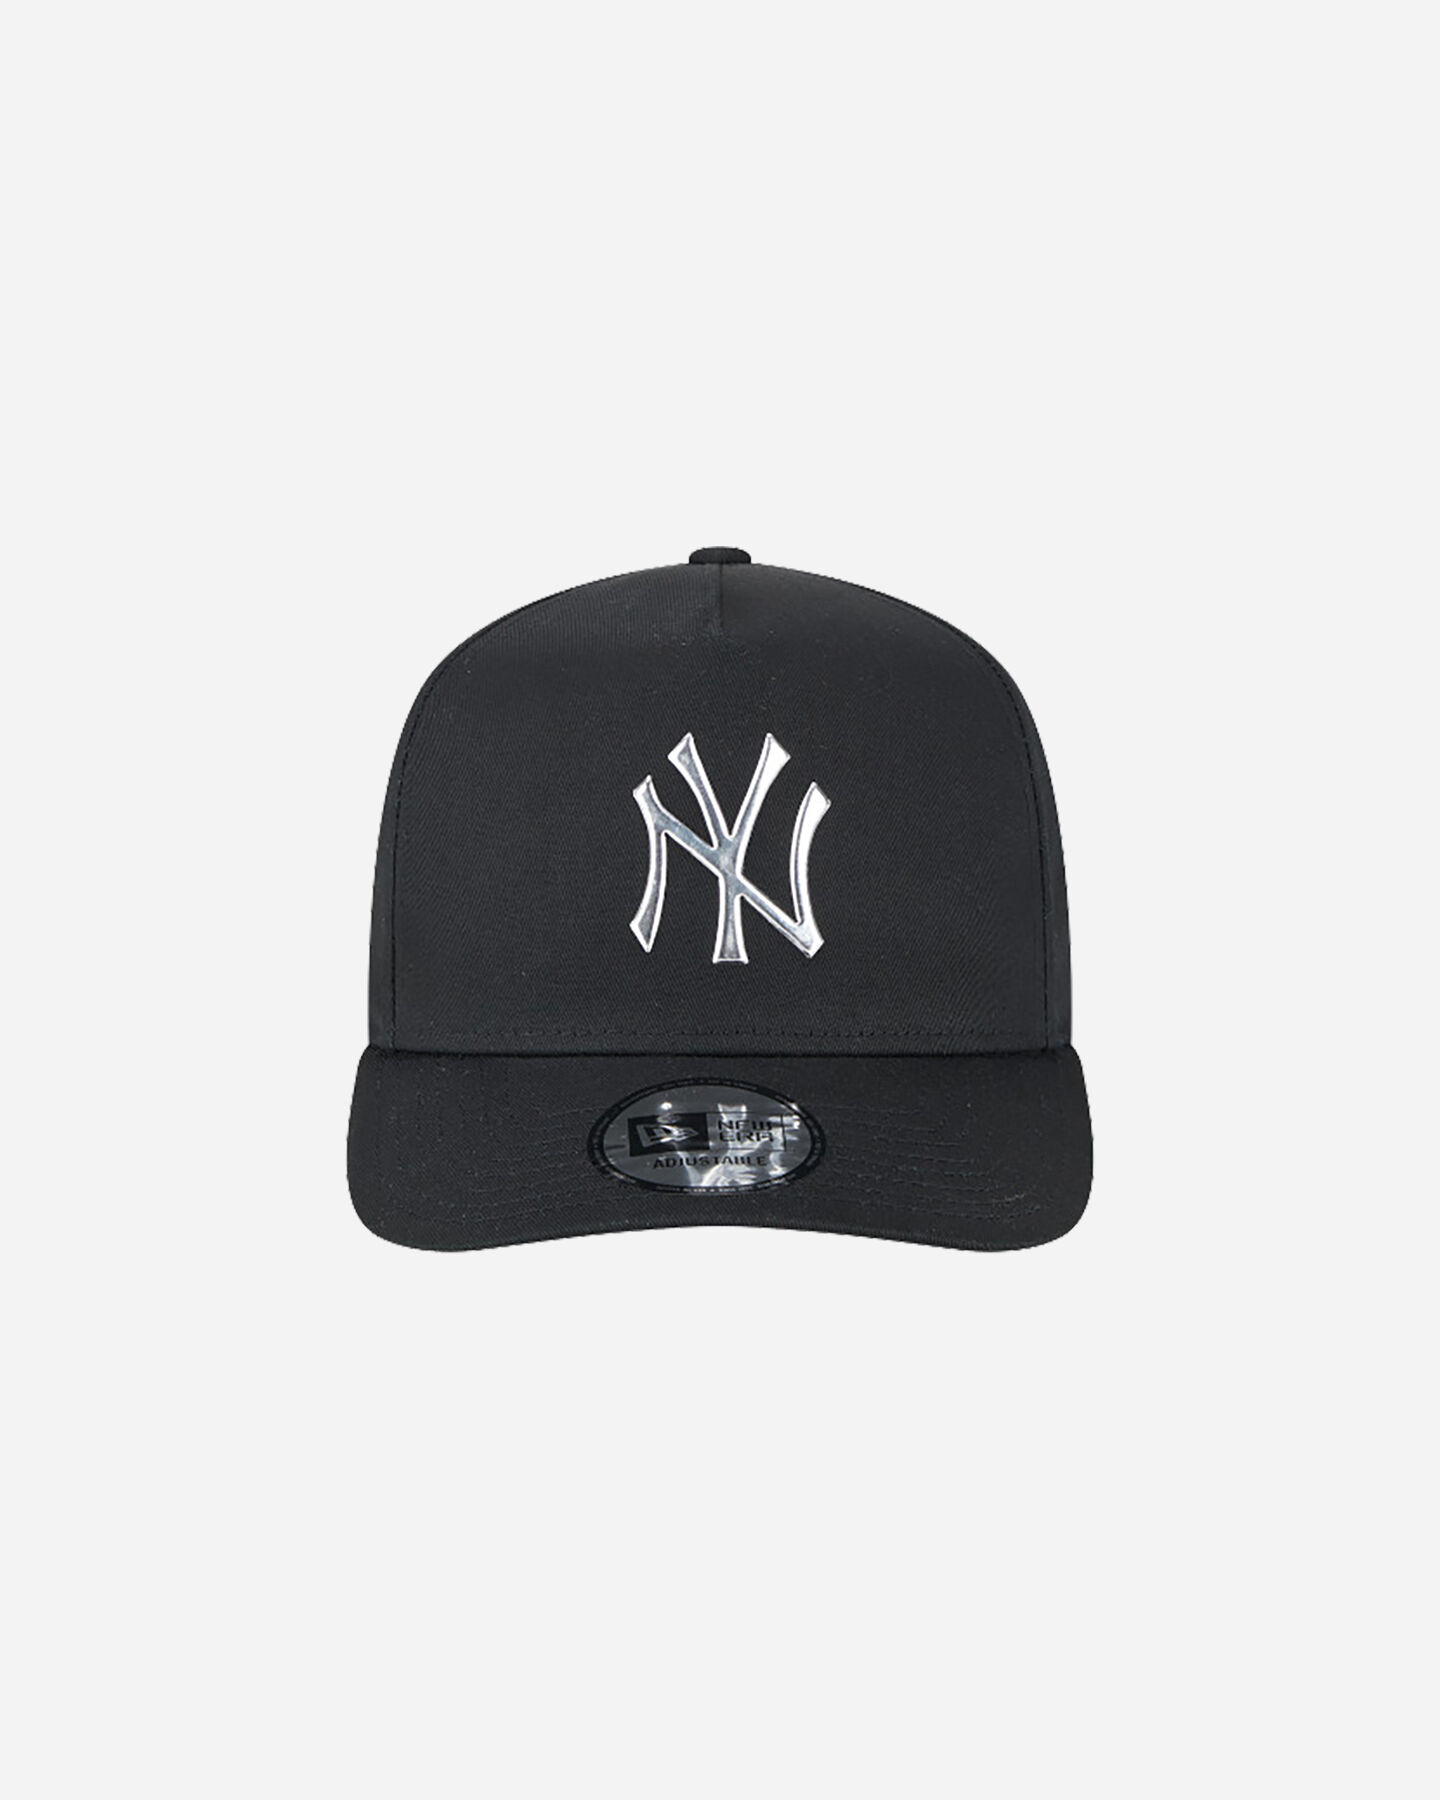  Cappellino NEW ERA 9FORTY MLB EFRAME FOIL NEW YORK YANKEES  S5630877|001|OSFM scatto 1